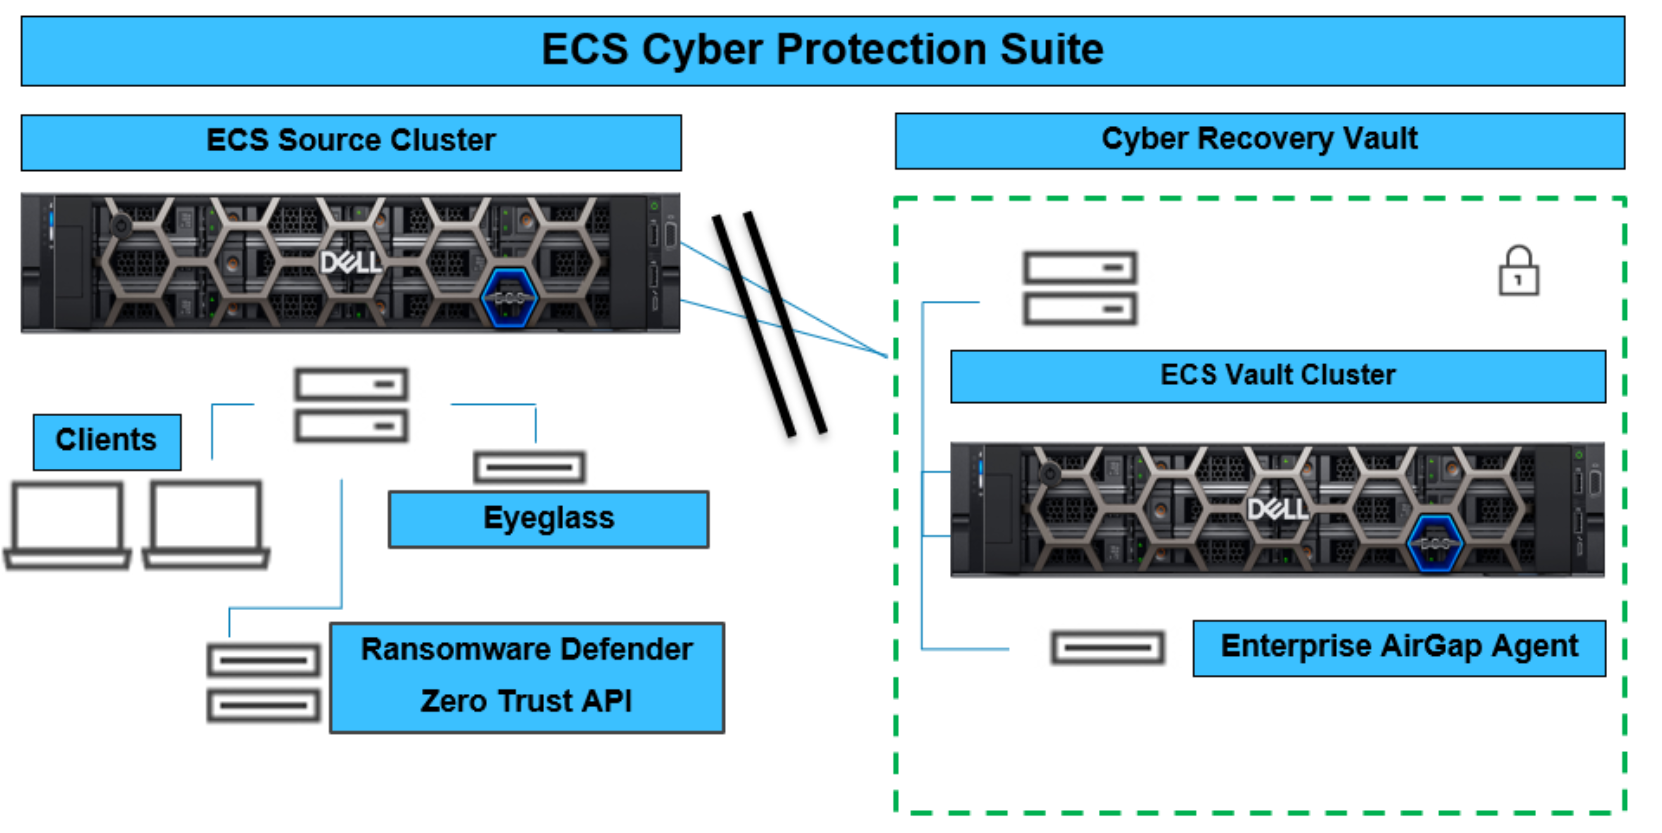 This is an ECS cyber protection suite, including source cluster and cyber recovery vault.